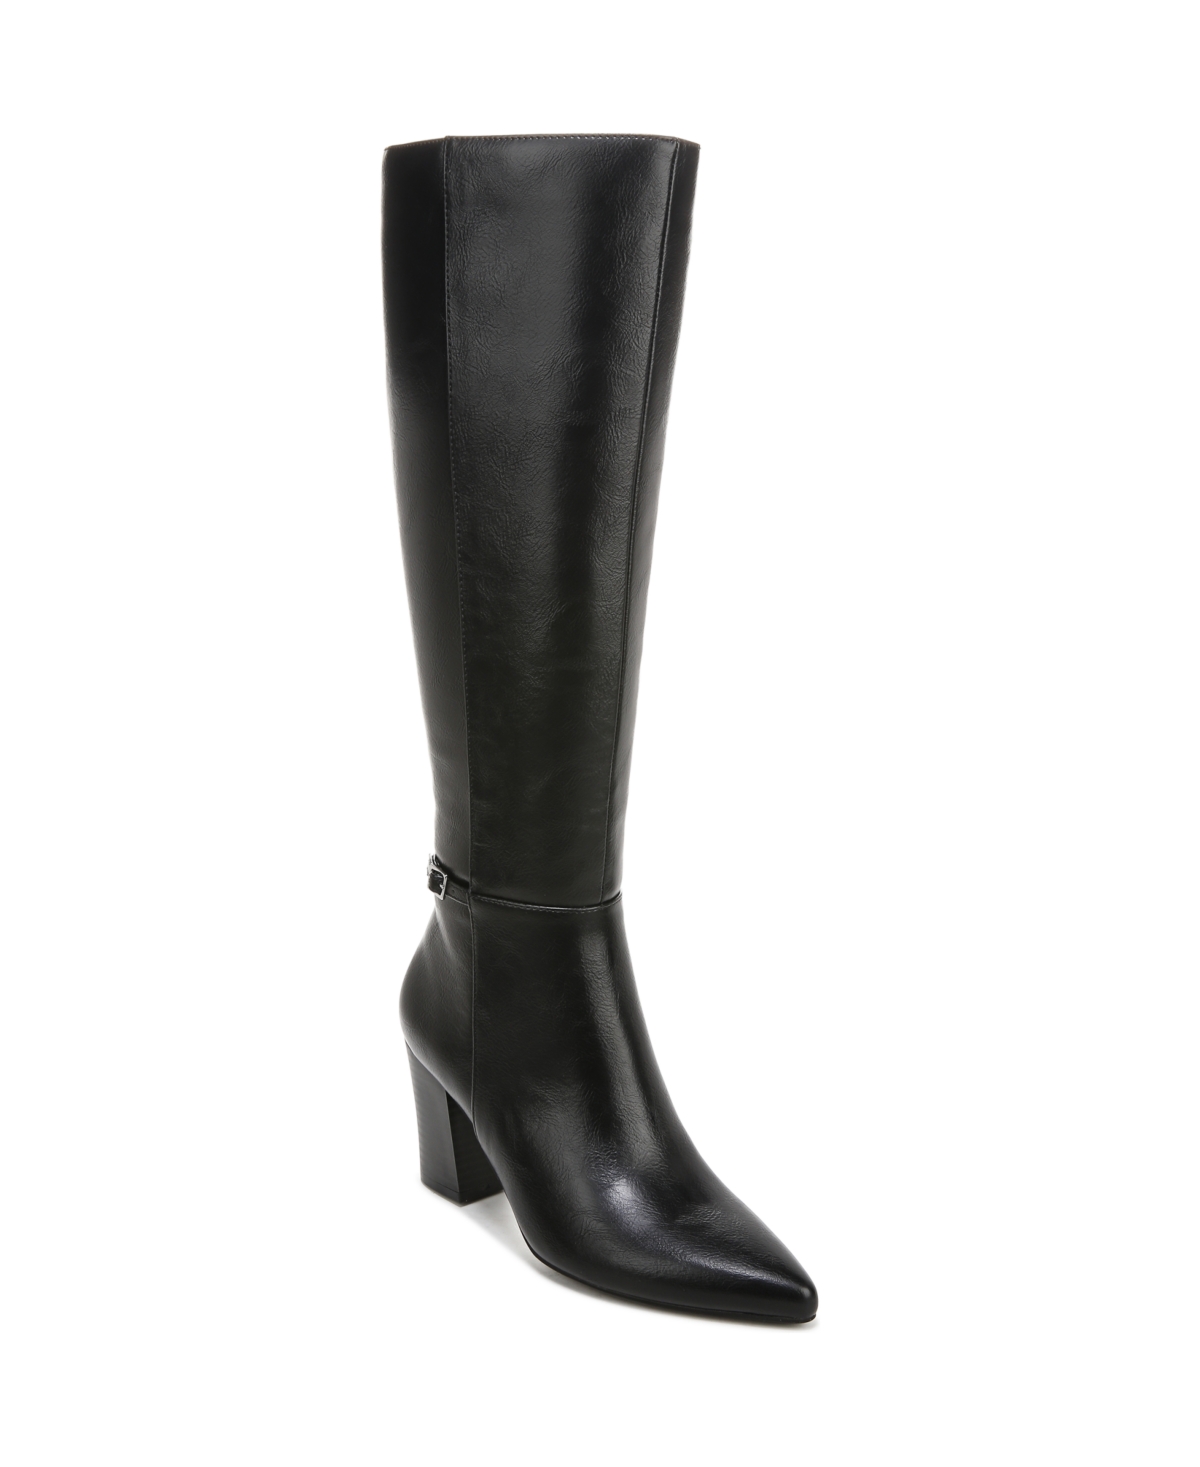 Stratford Knee High Boots - Black Faux Leather